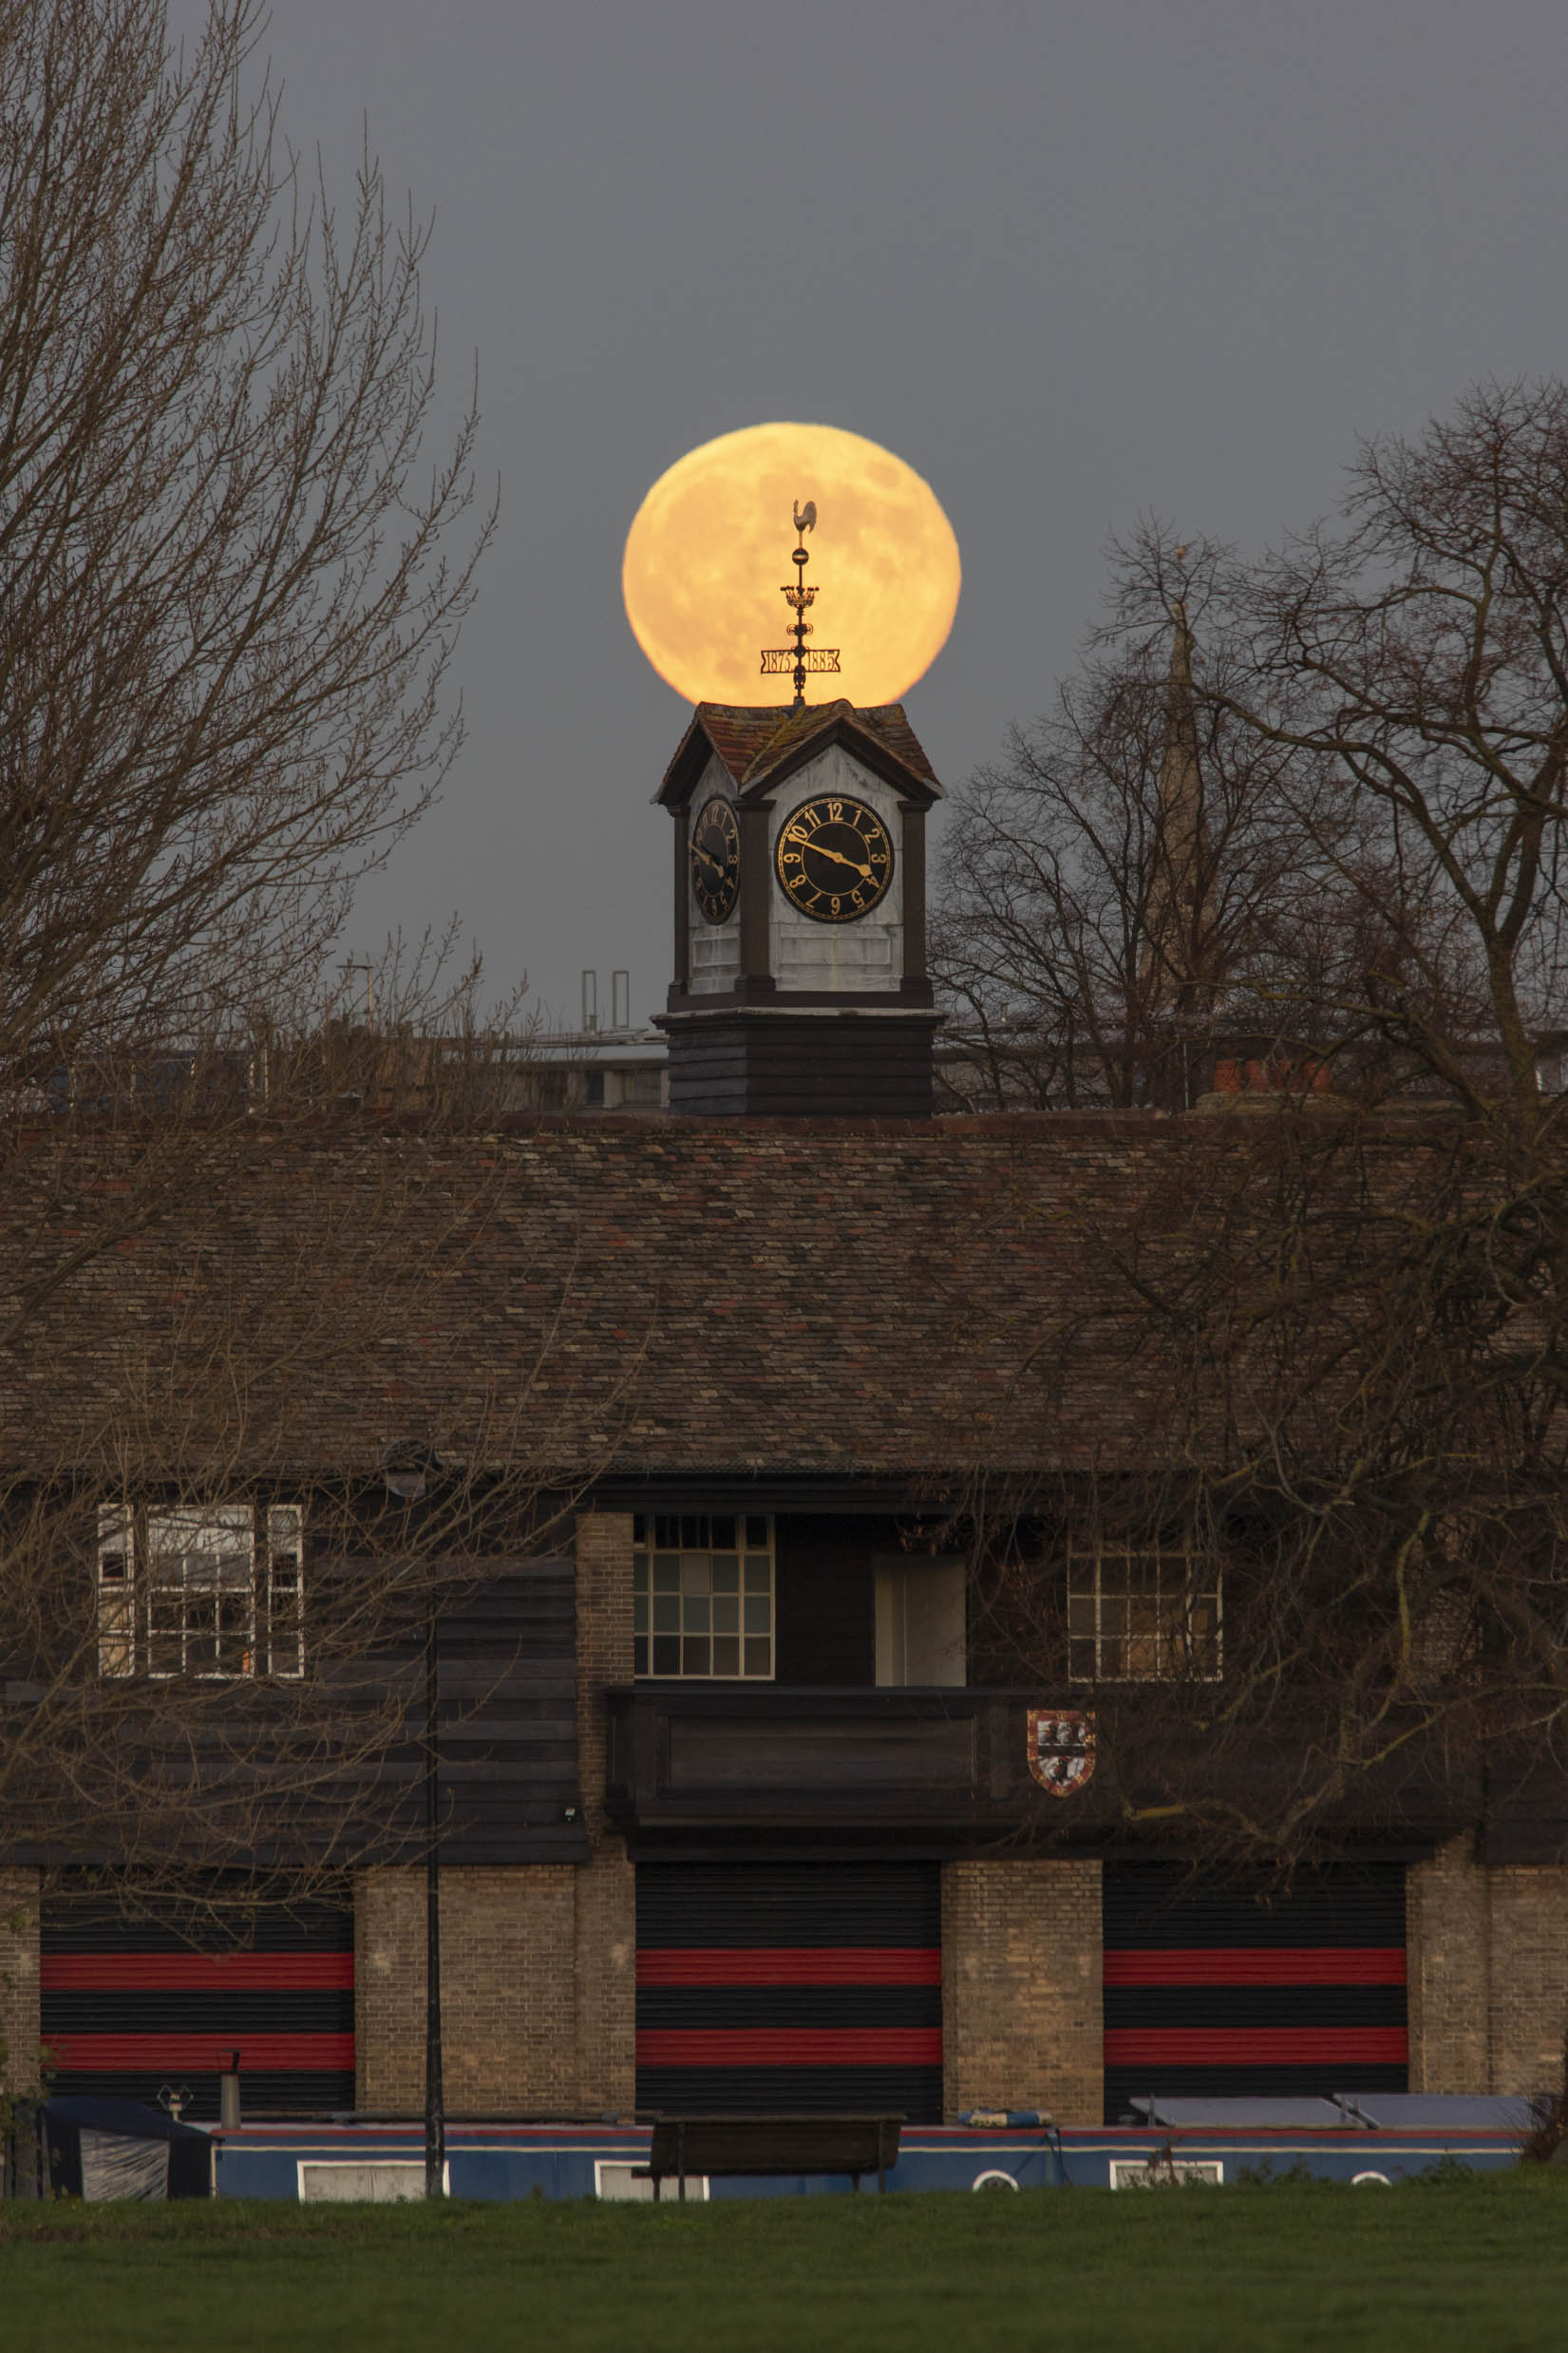 I hoped to get a photo of the November 2022 full moon rising over the Cambridge college boathouses, and it so happened that it aligned nicely with the Jesus College windvane.